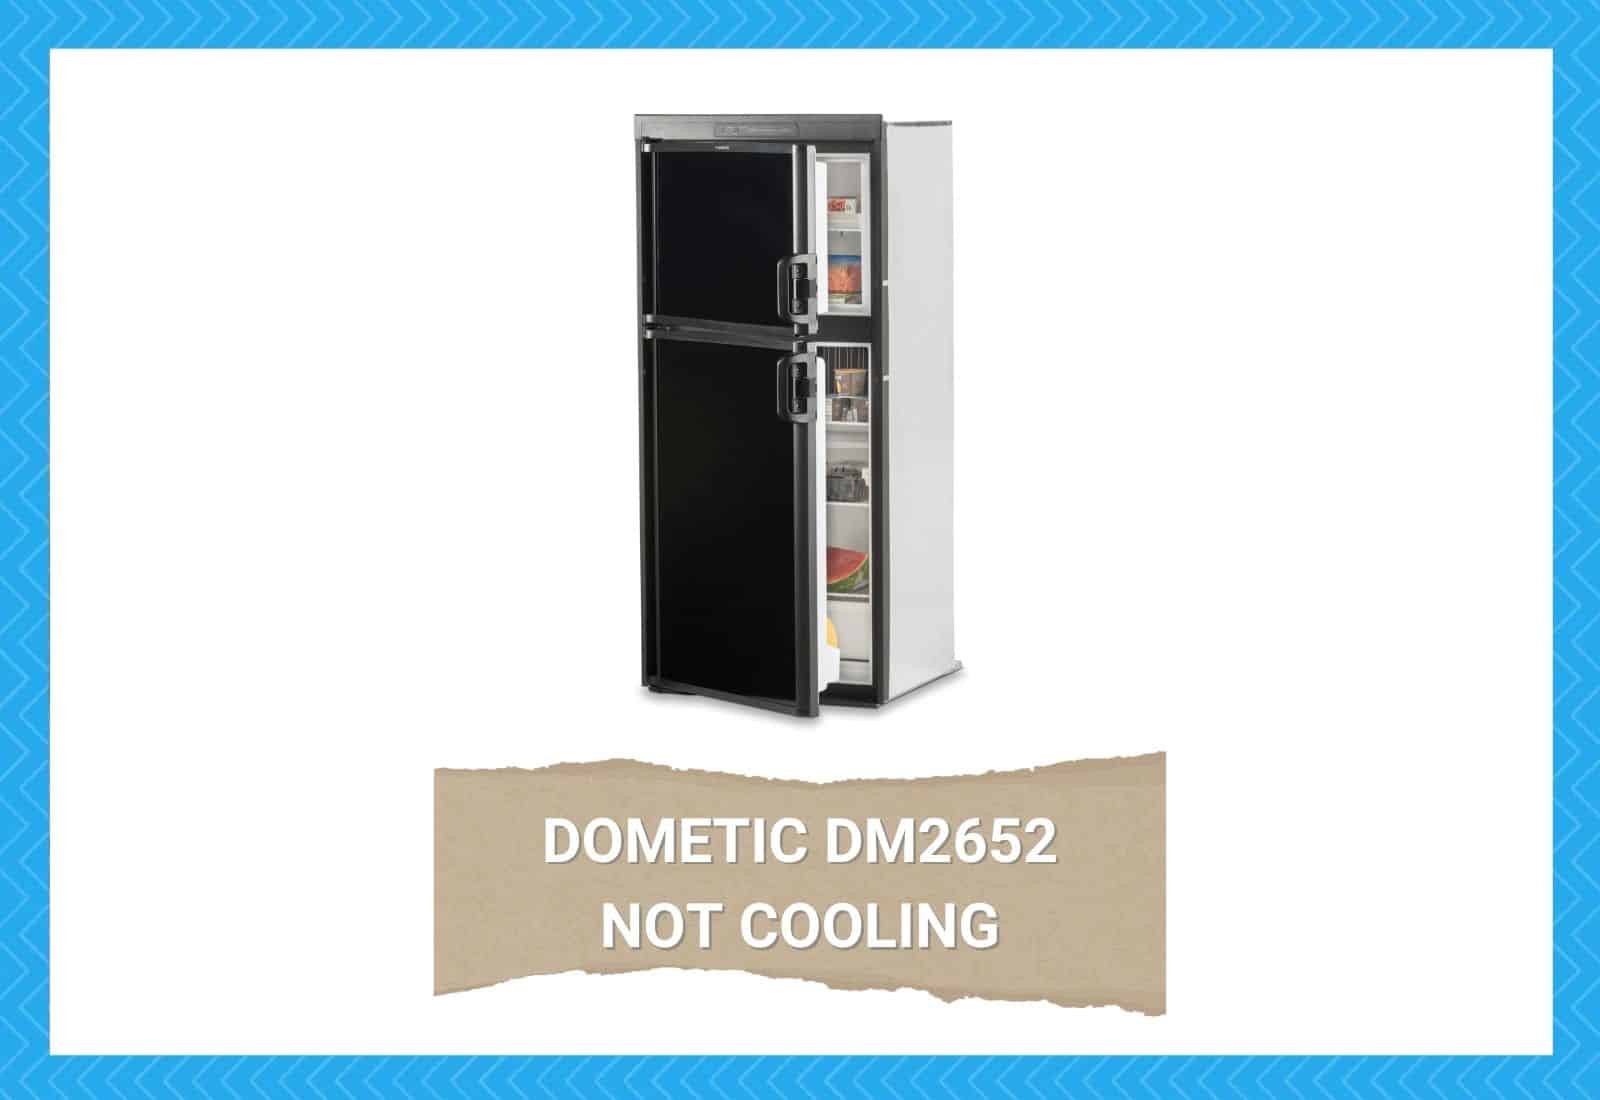 Dometic DM2652 Not Cooling